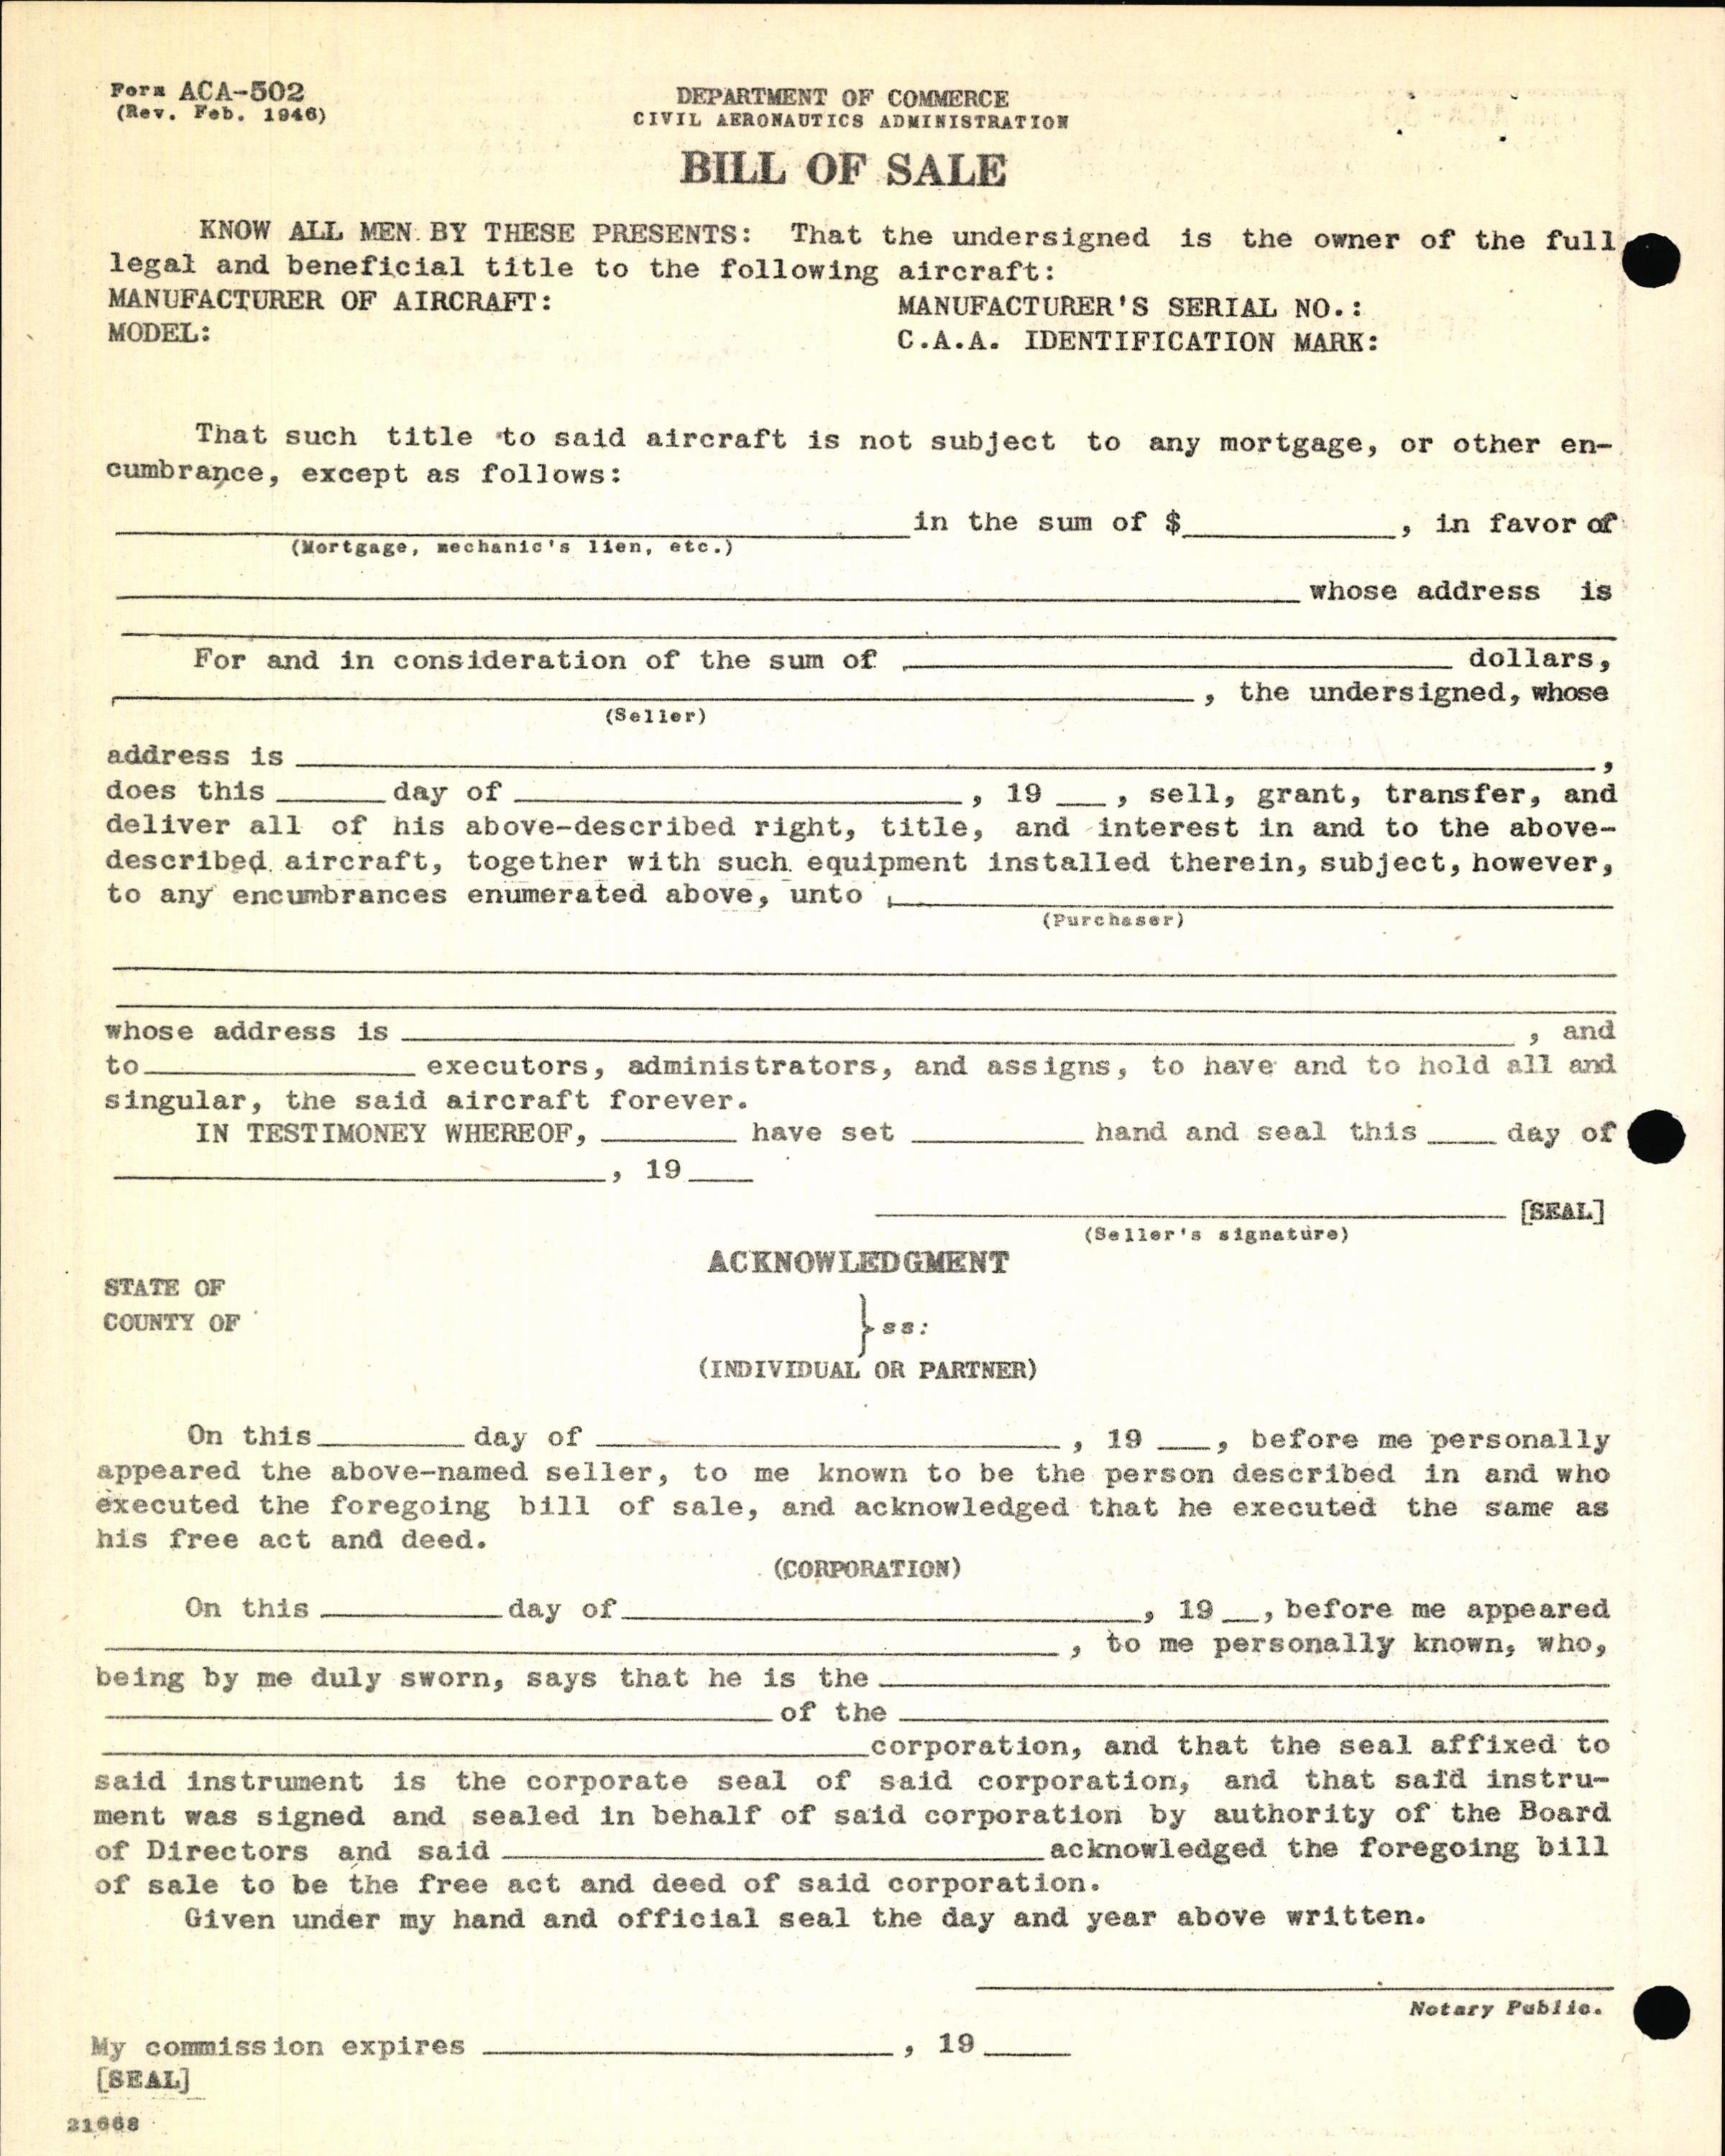 Sample page 6 from AirCorps Library document: Technical Information for Serial Number 1206